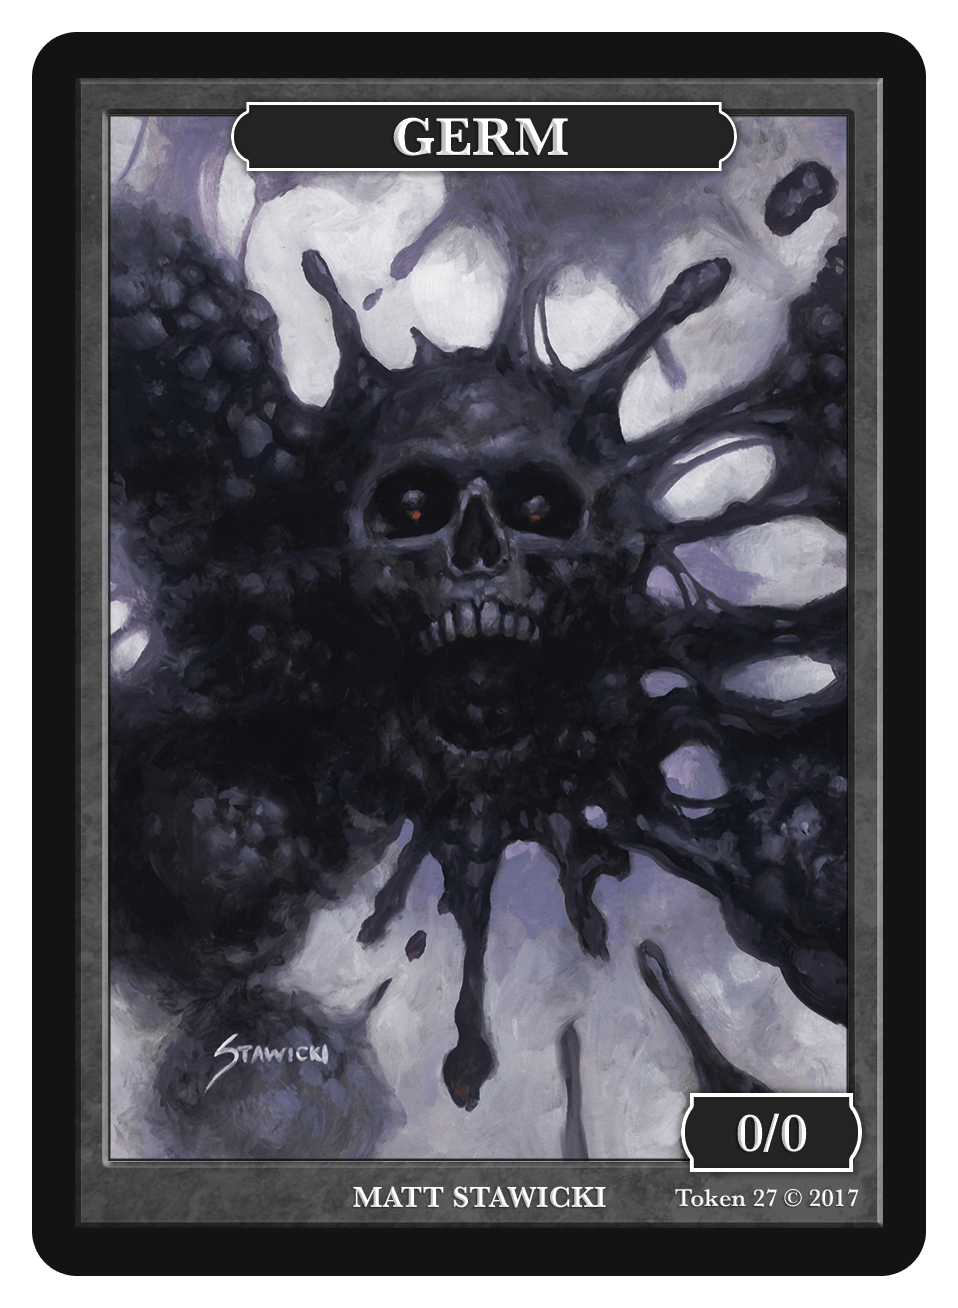 Germ Token (0/0) by Matt Stawicki - Token - Original Magic Art - Accessories for Magic the Gathering and other card games